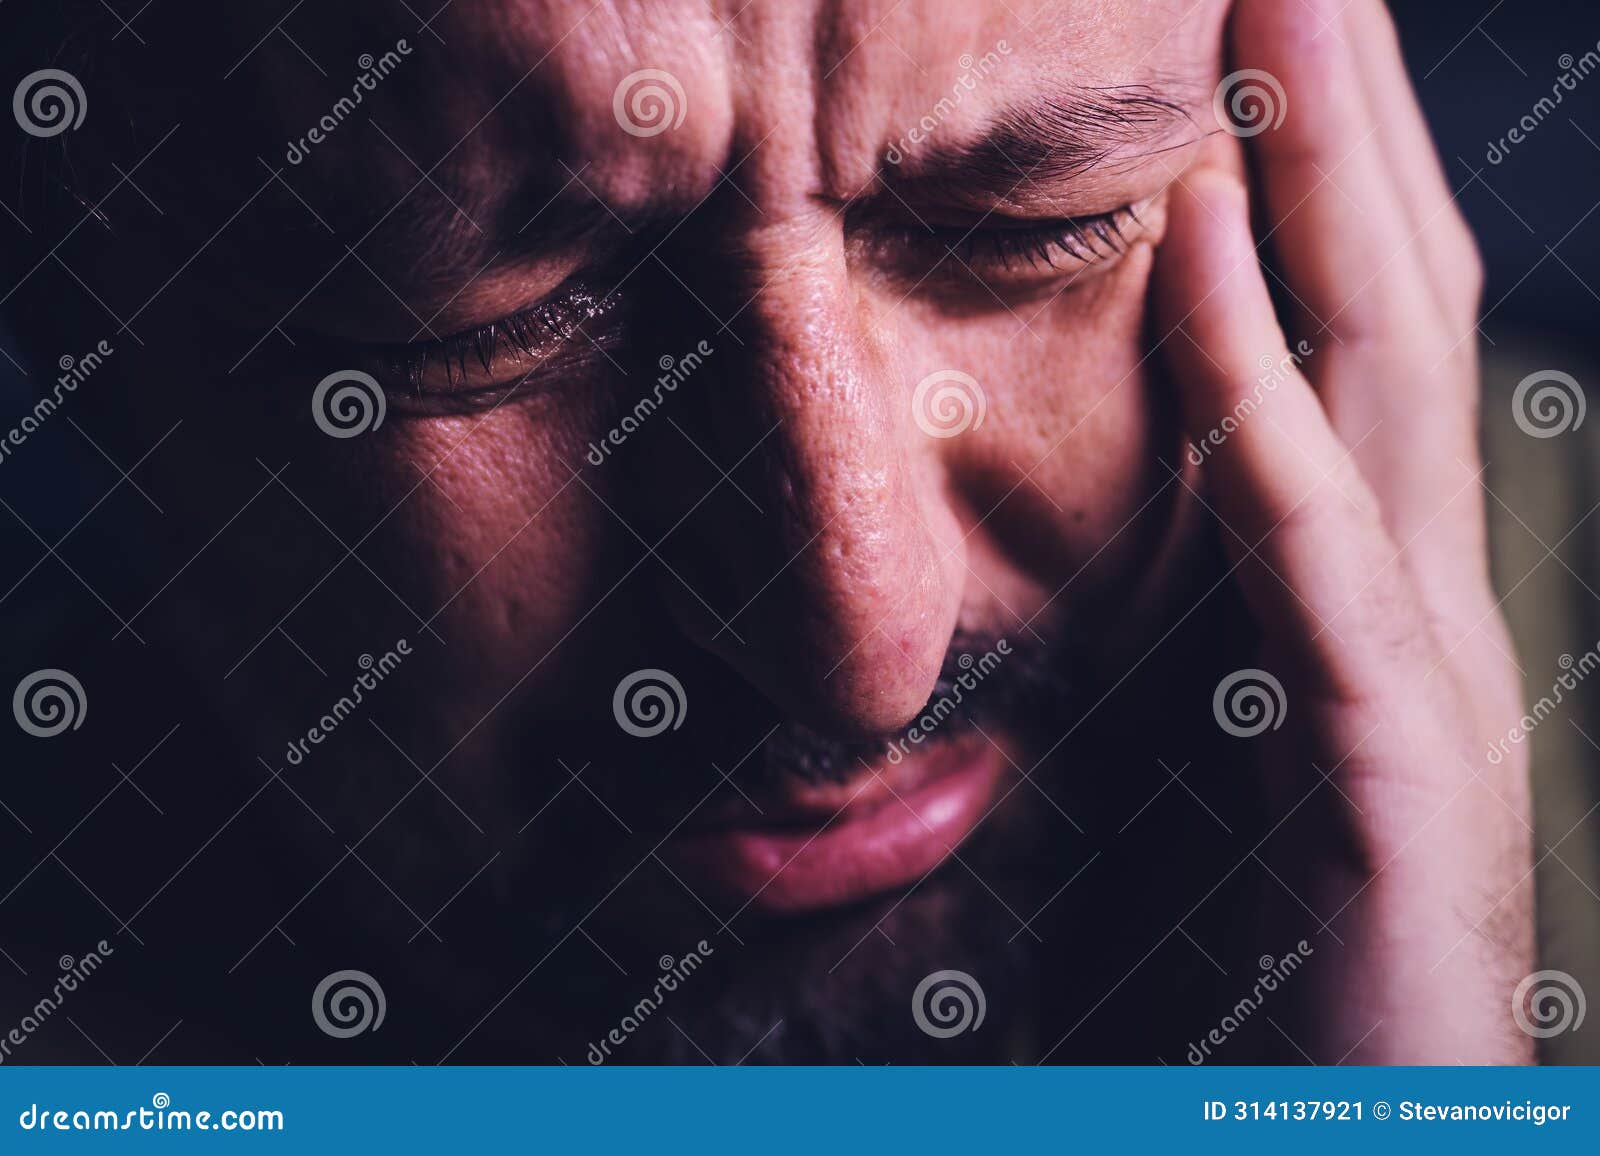 hopelessness and despair, closeup of portrait of sad crying adult man grieving in dark room